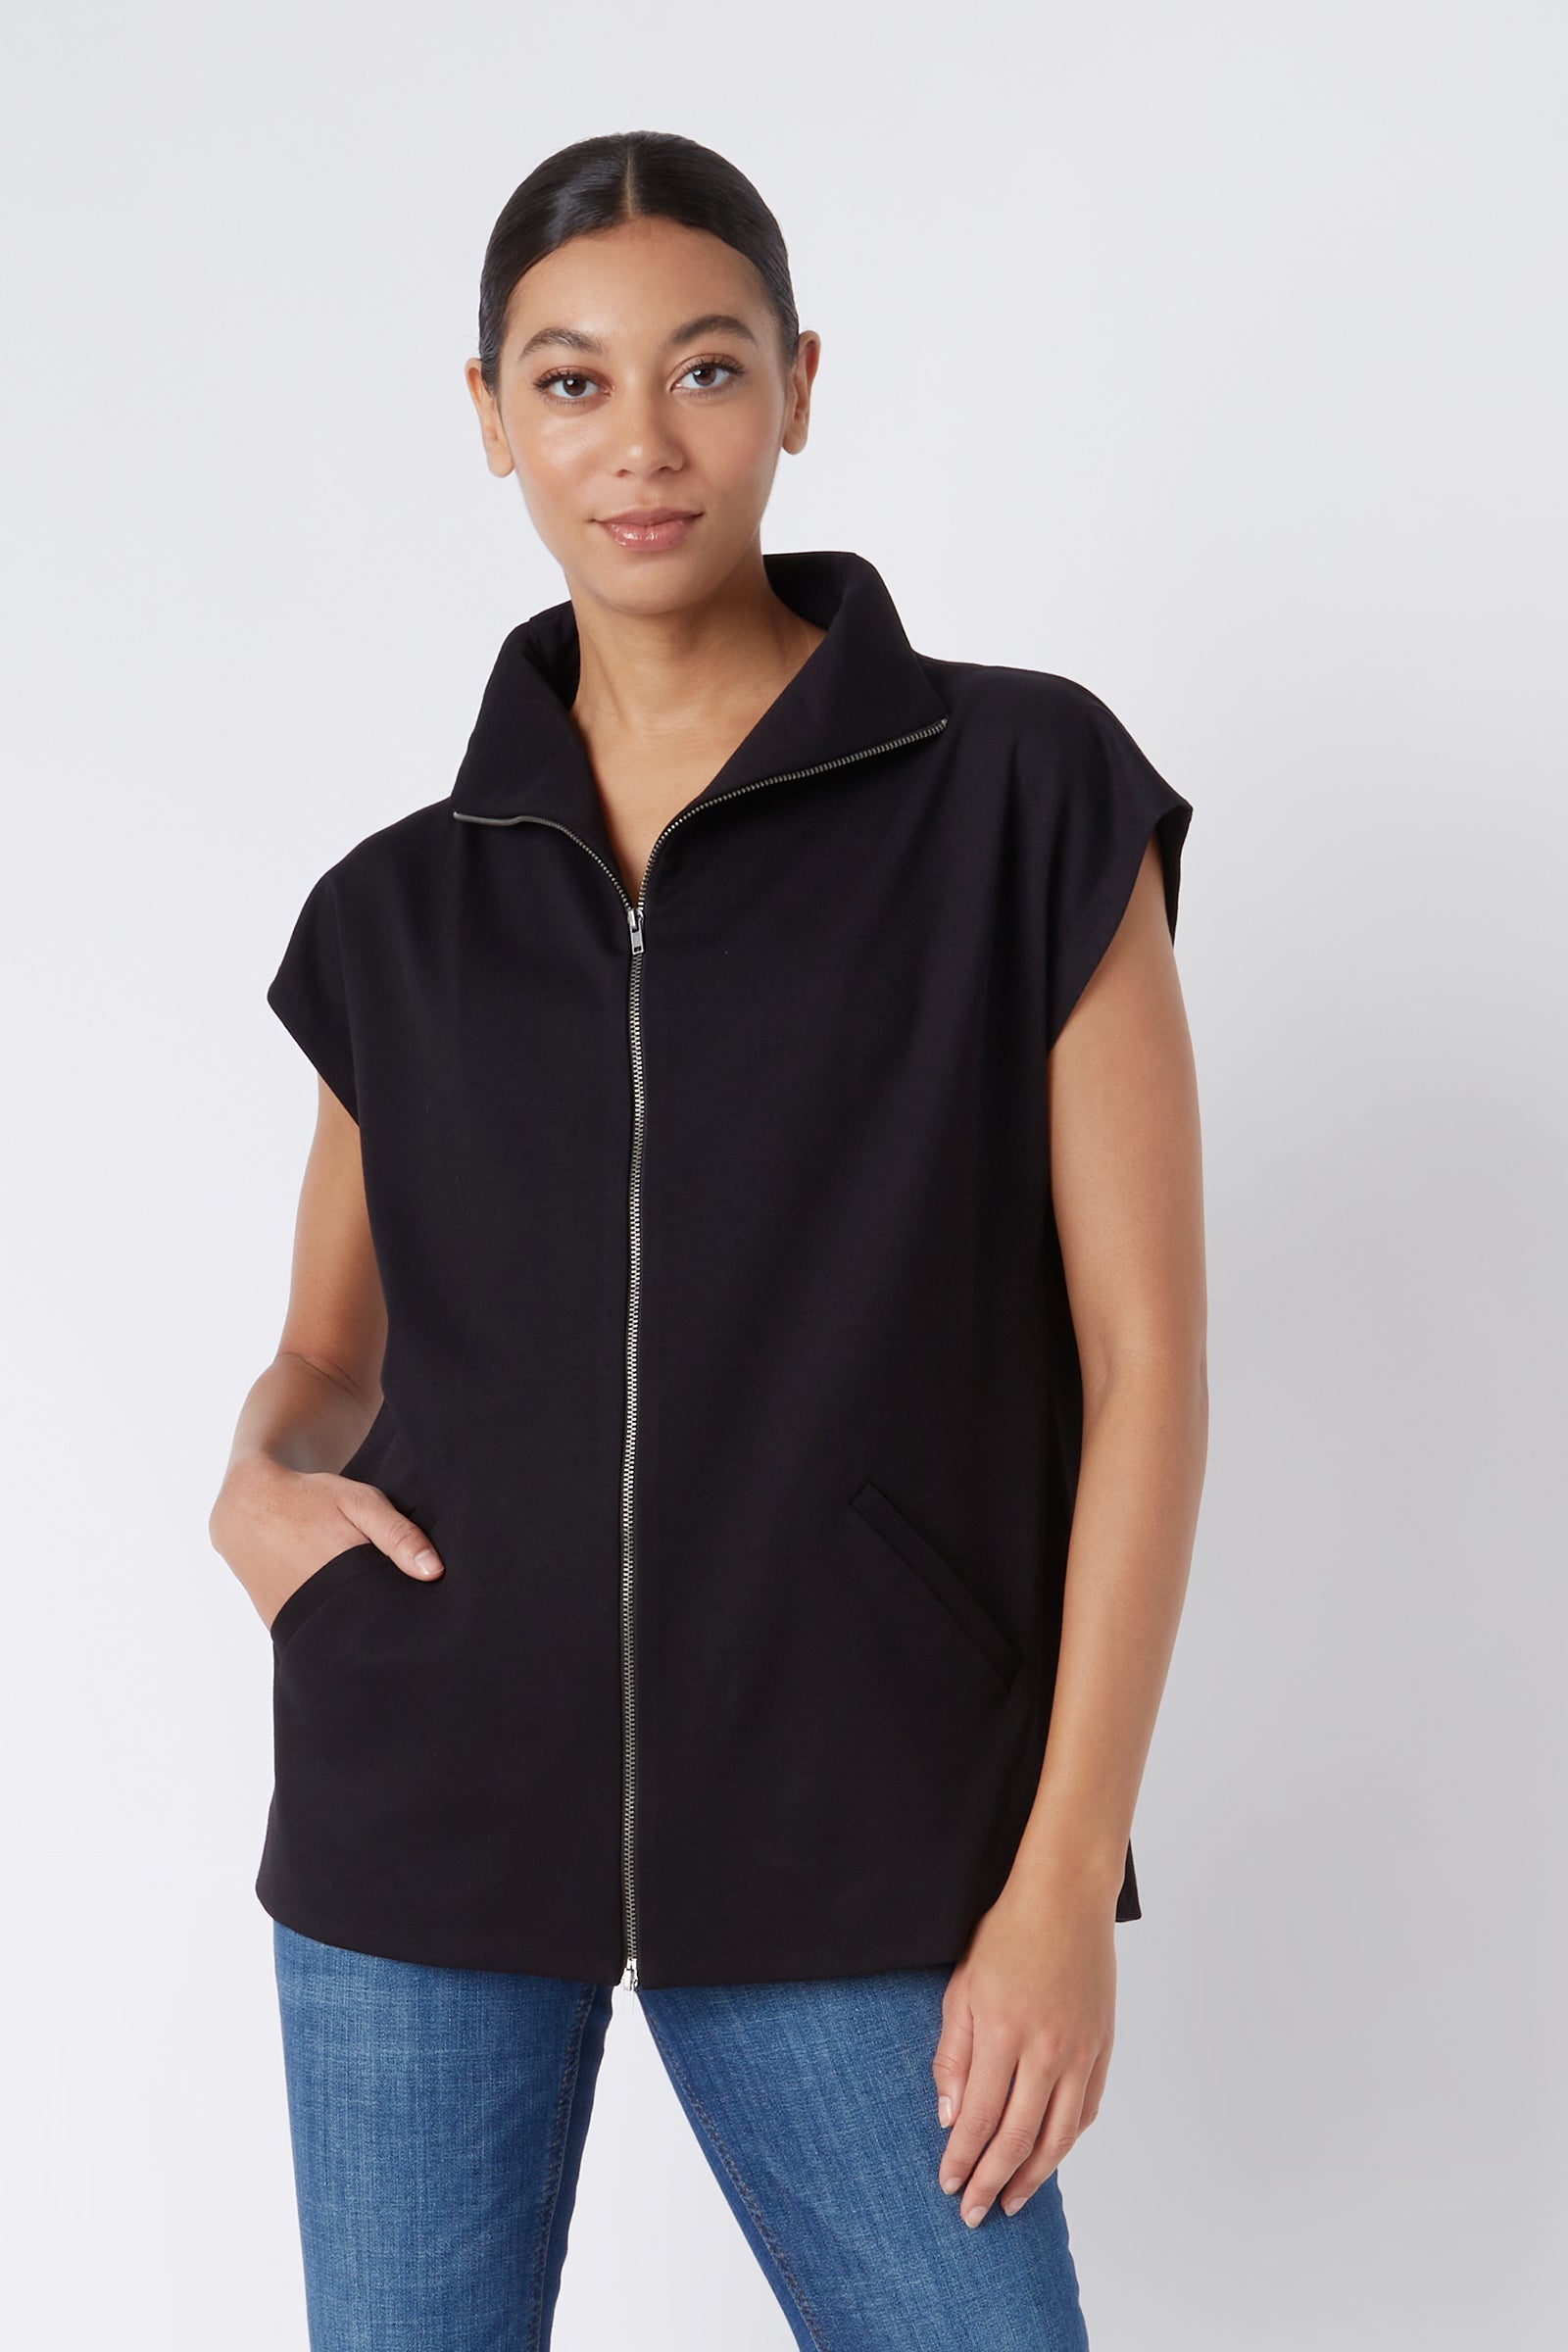 Kal Rieman Anne Collared Zip Vest in Black Ponte on Model with Hand in Pocket Cropped Front View